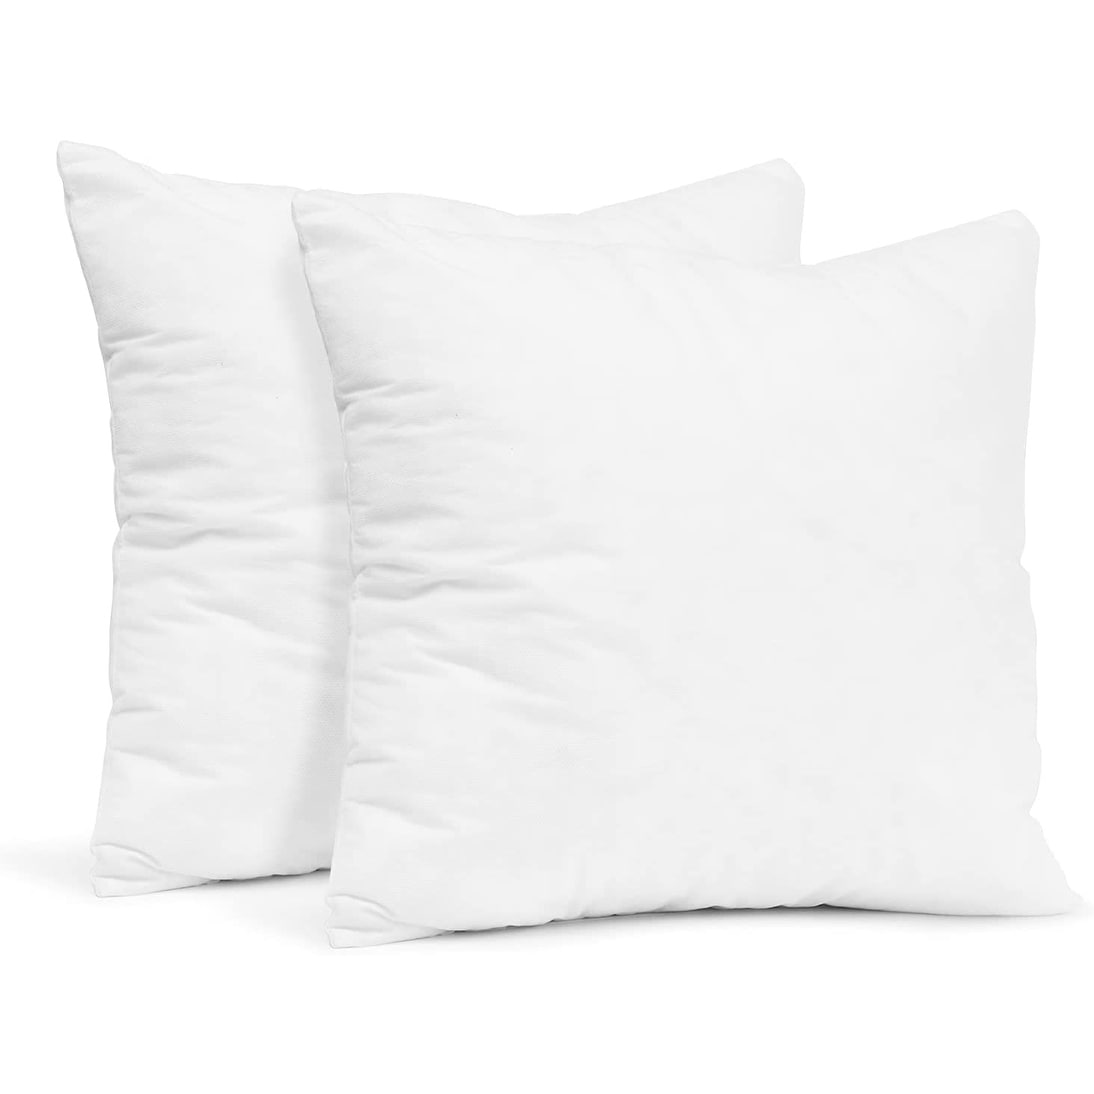 https://ak1.ostkcdn.com/images/products/is/images/direct/68d8954a38a4793777fb89210c744e28ca413cd2/Empyrean-Bedding-Throw-Pillow-Insert---Cotton-Blend-Outer-Shell-Decorative-Pillows-%28Pack-of-2%29.jpg